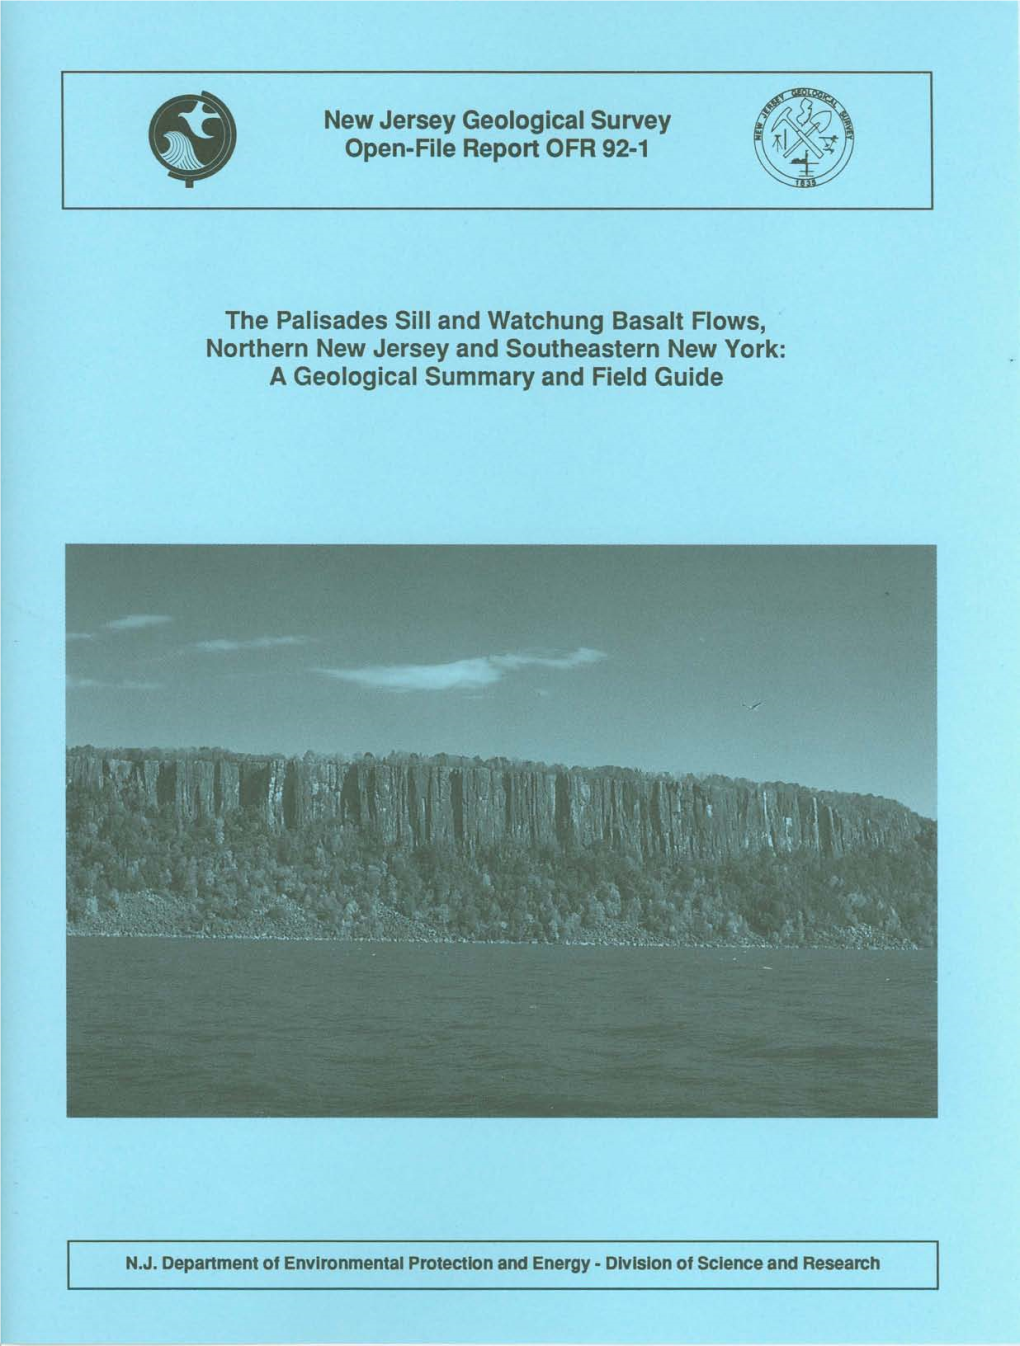 The Palisades Sill and Watchung Basalt Flows, Northern New Jersey and Southeastern New York: a Geological Summary and Field Guide